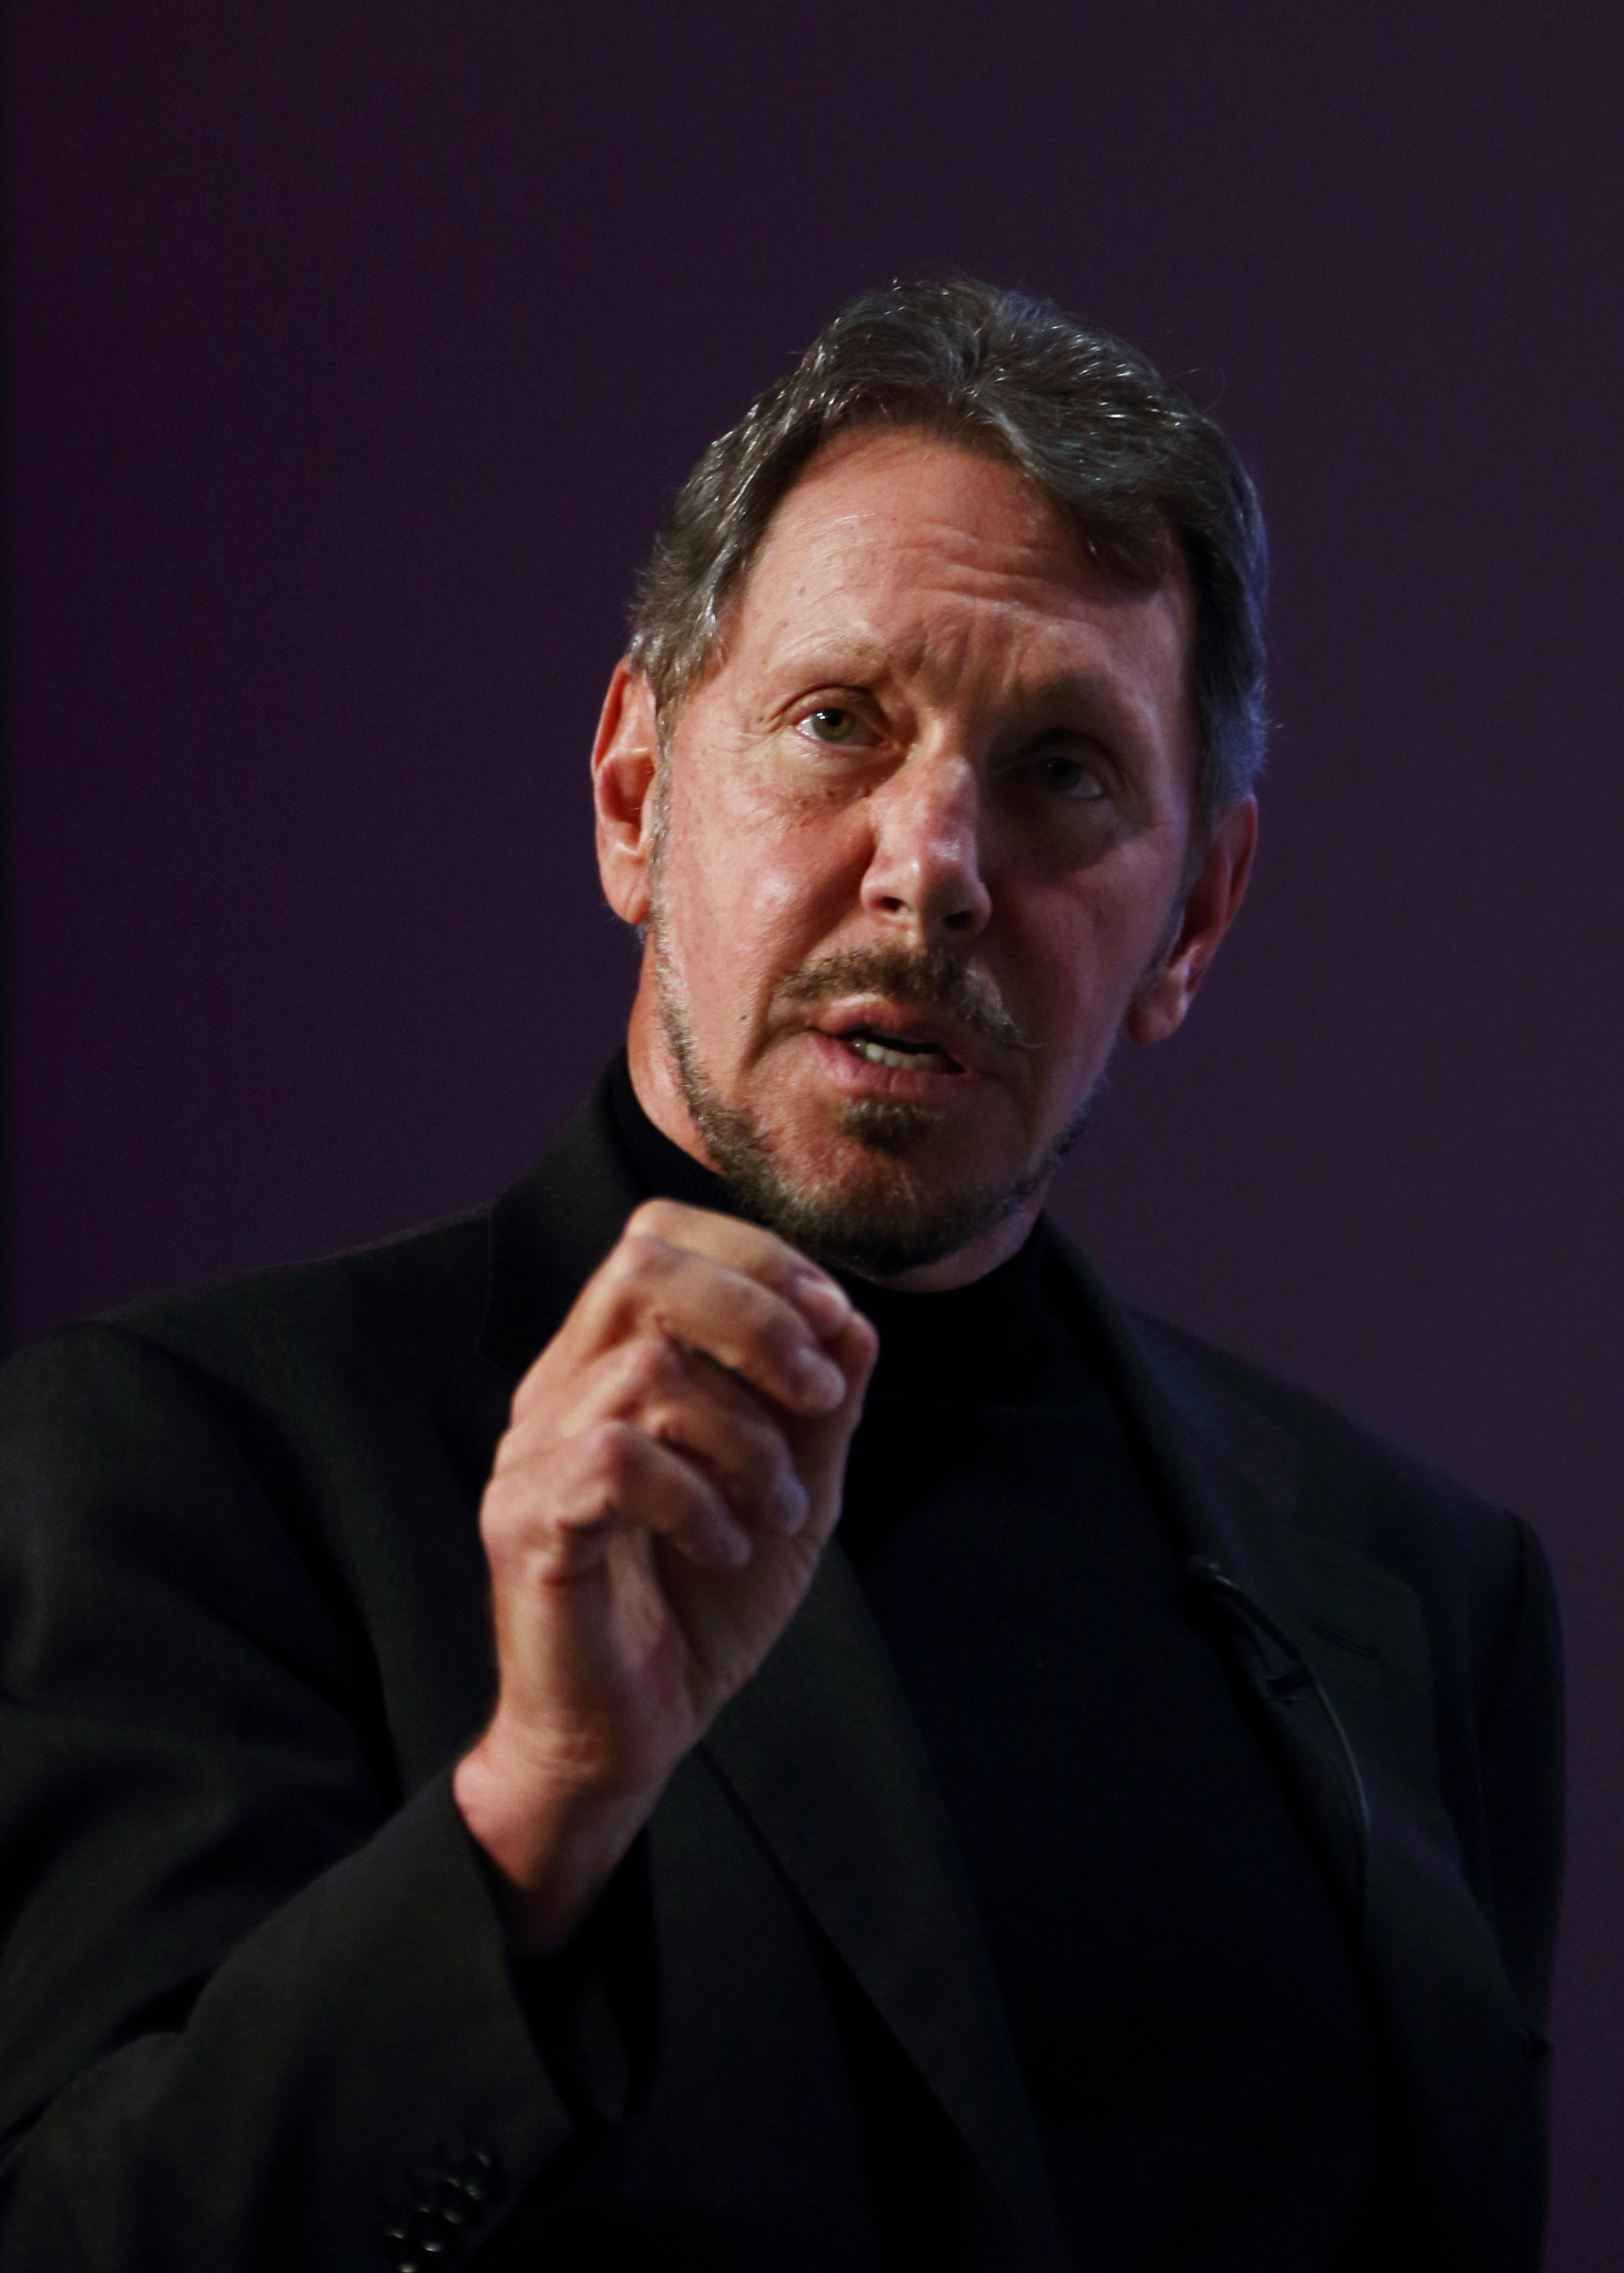 Larry Ellison, chief executive officer of Oracle Corp., makes a speech at the New Economy Summit 2014 in Tokyo on April 9, 2014. (Bloomberg/Getty Images)